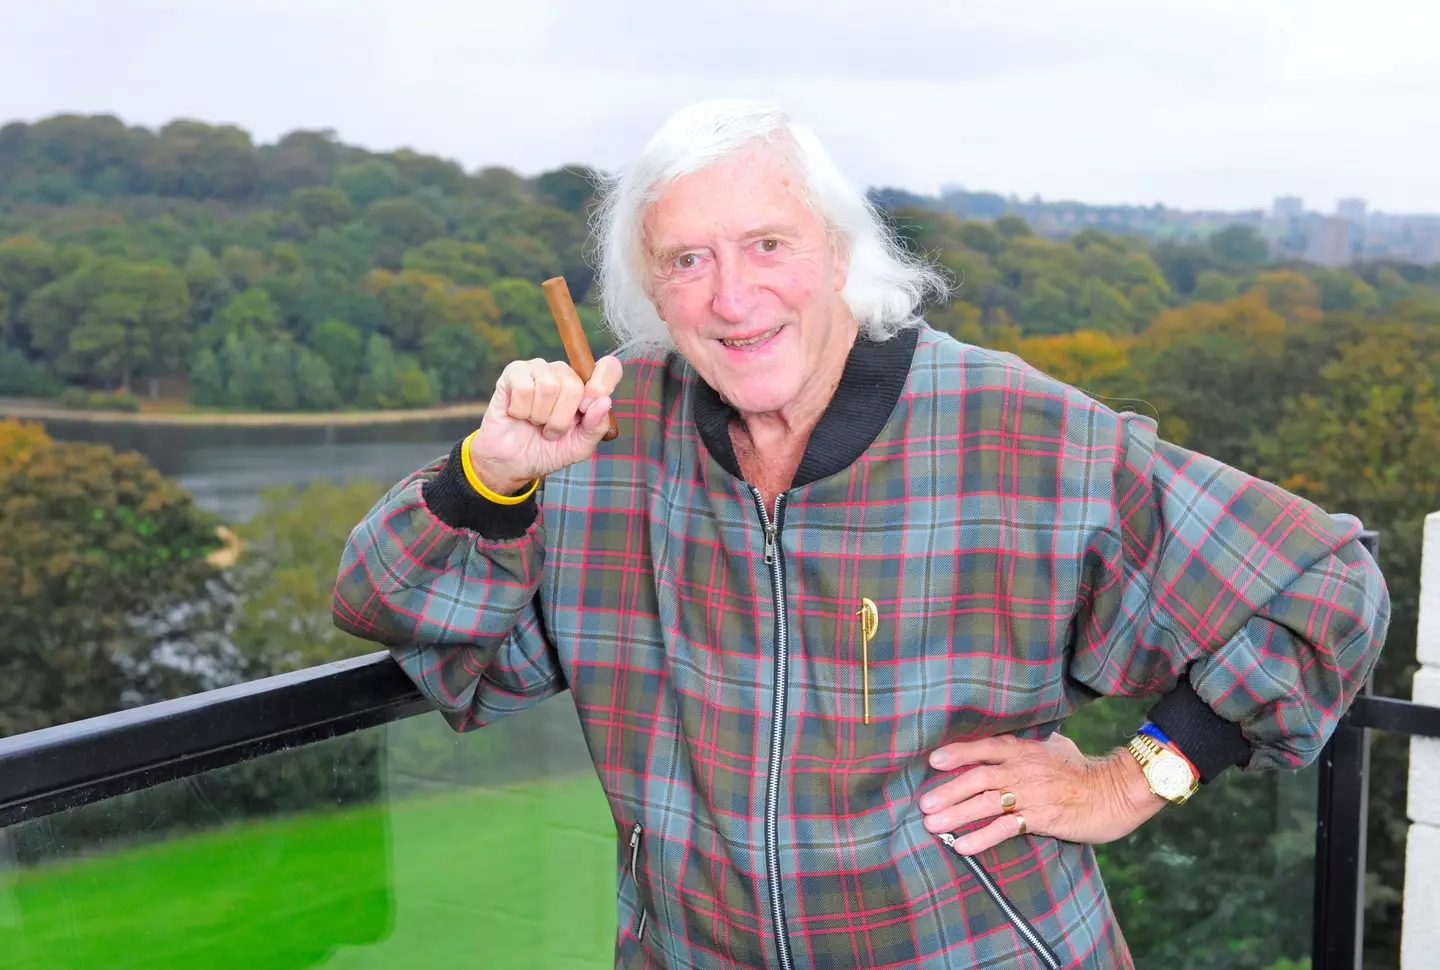 Savile died in 2011, shortly before his extensive list of crimes was made public. [